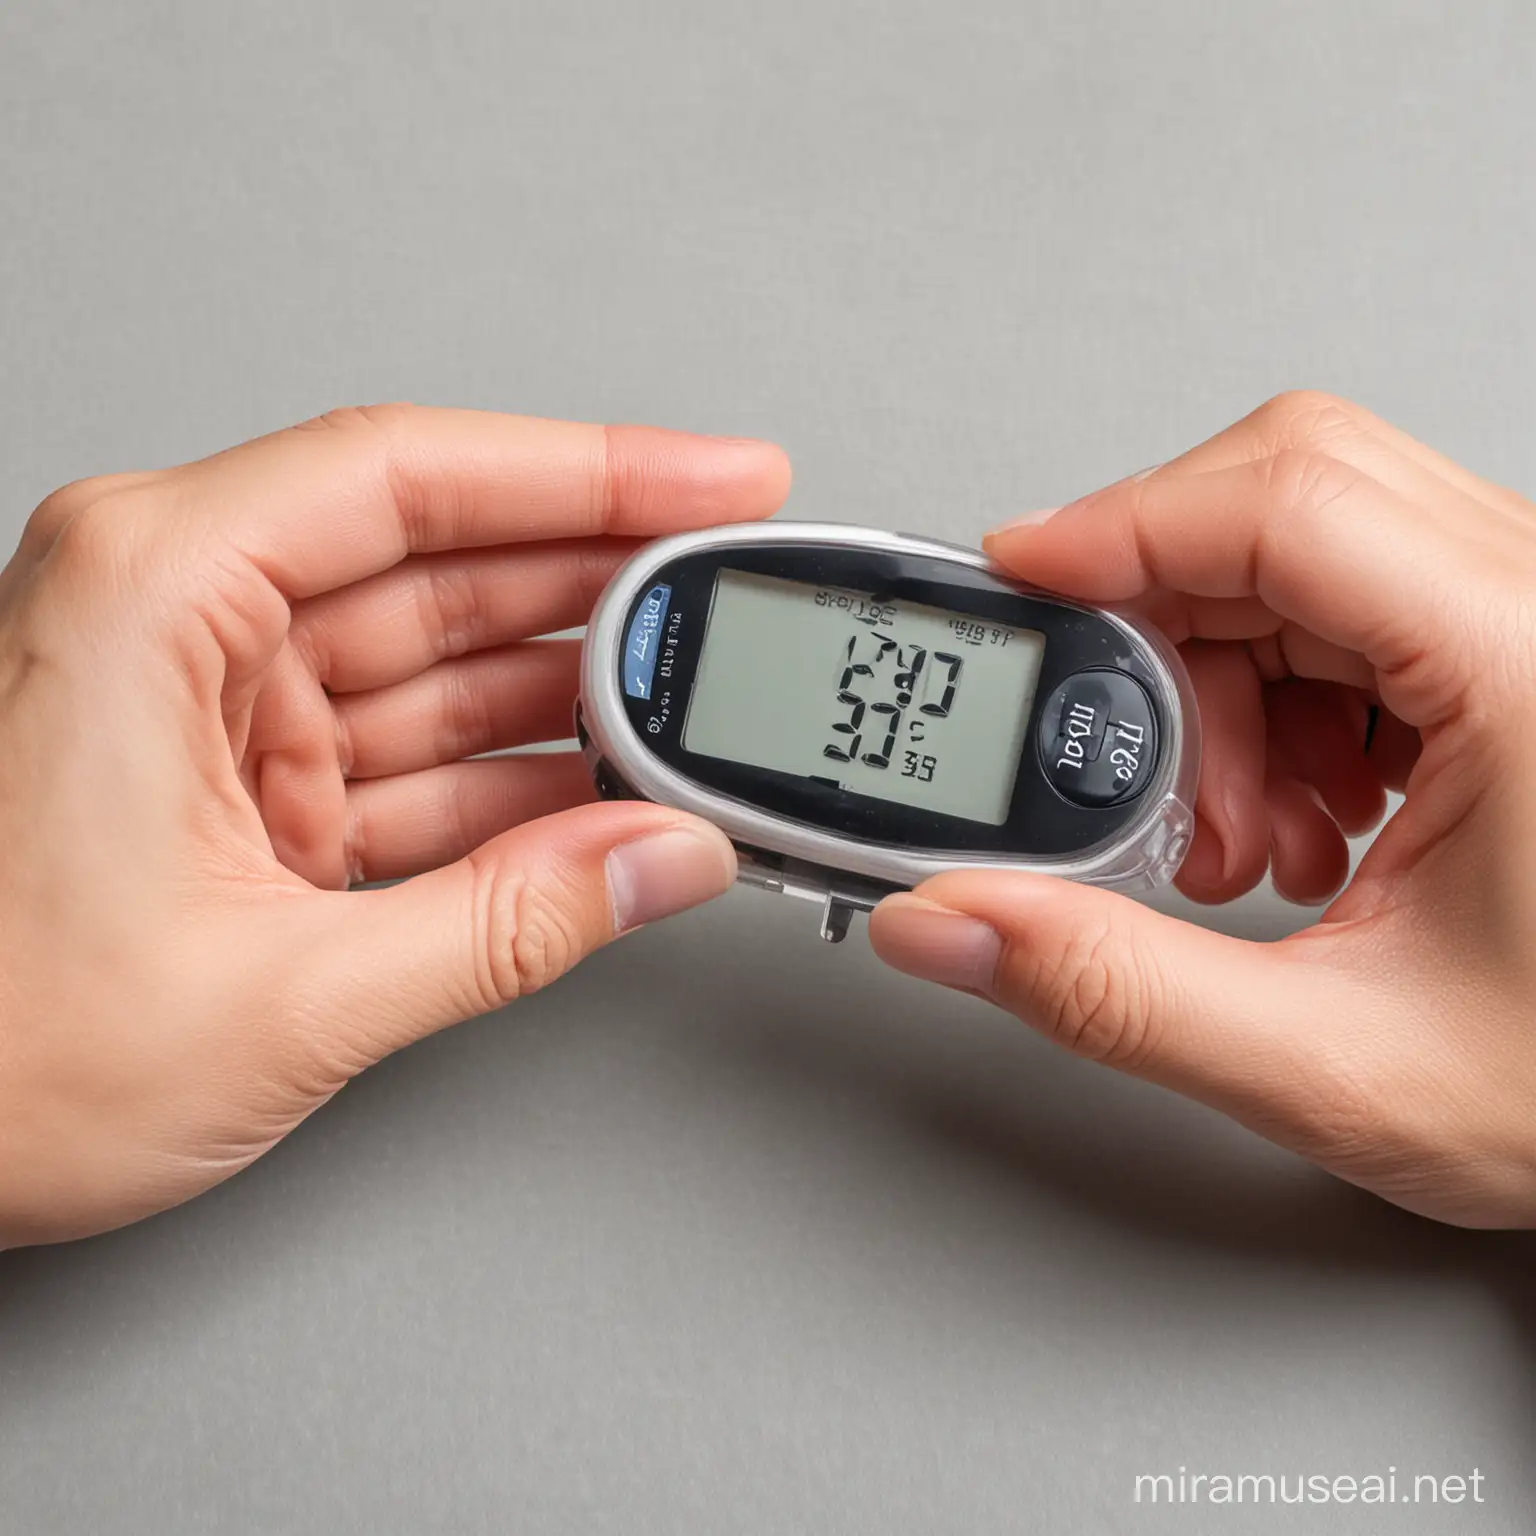 Monitoring Blood Glucose Levels with a Handheld Meter